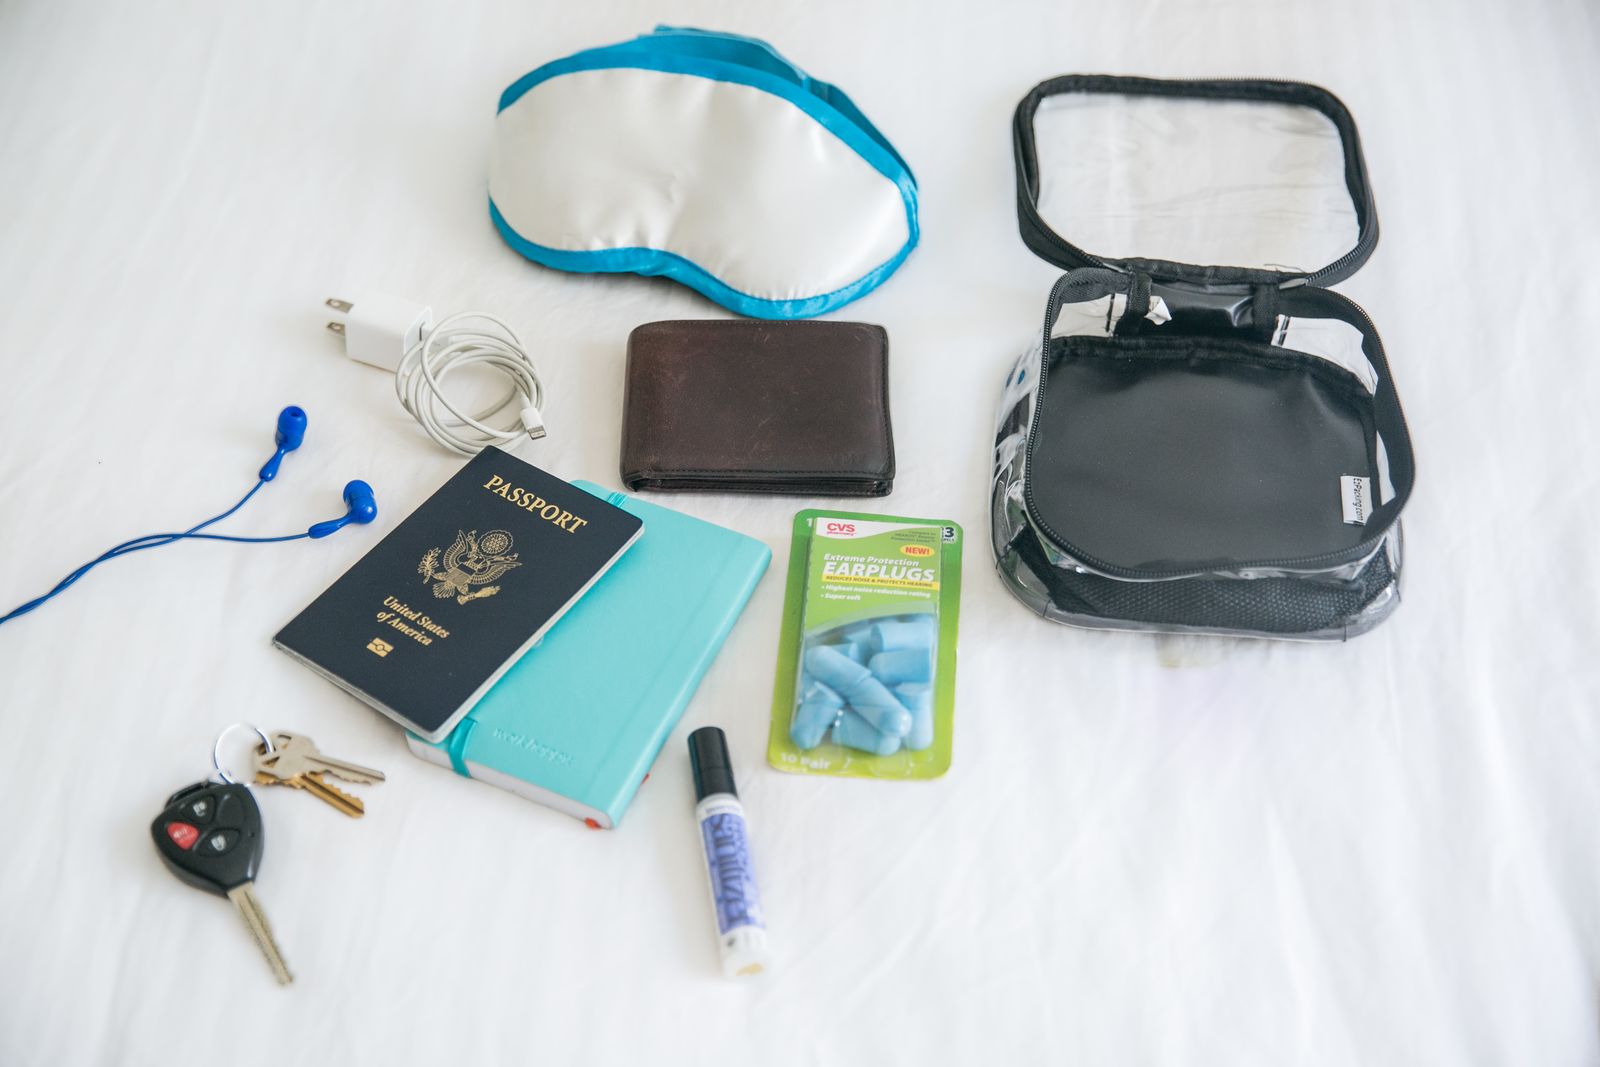 Passport and other essentials in a black extra small cube